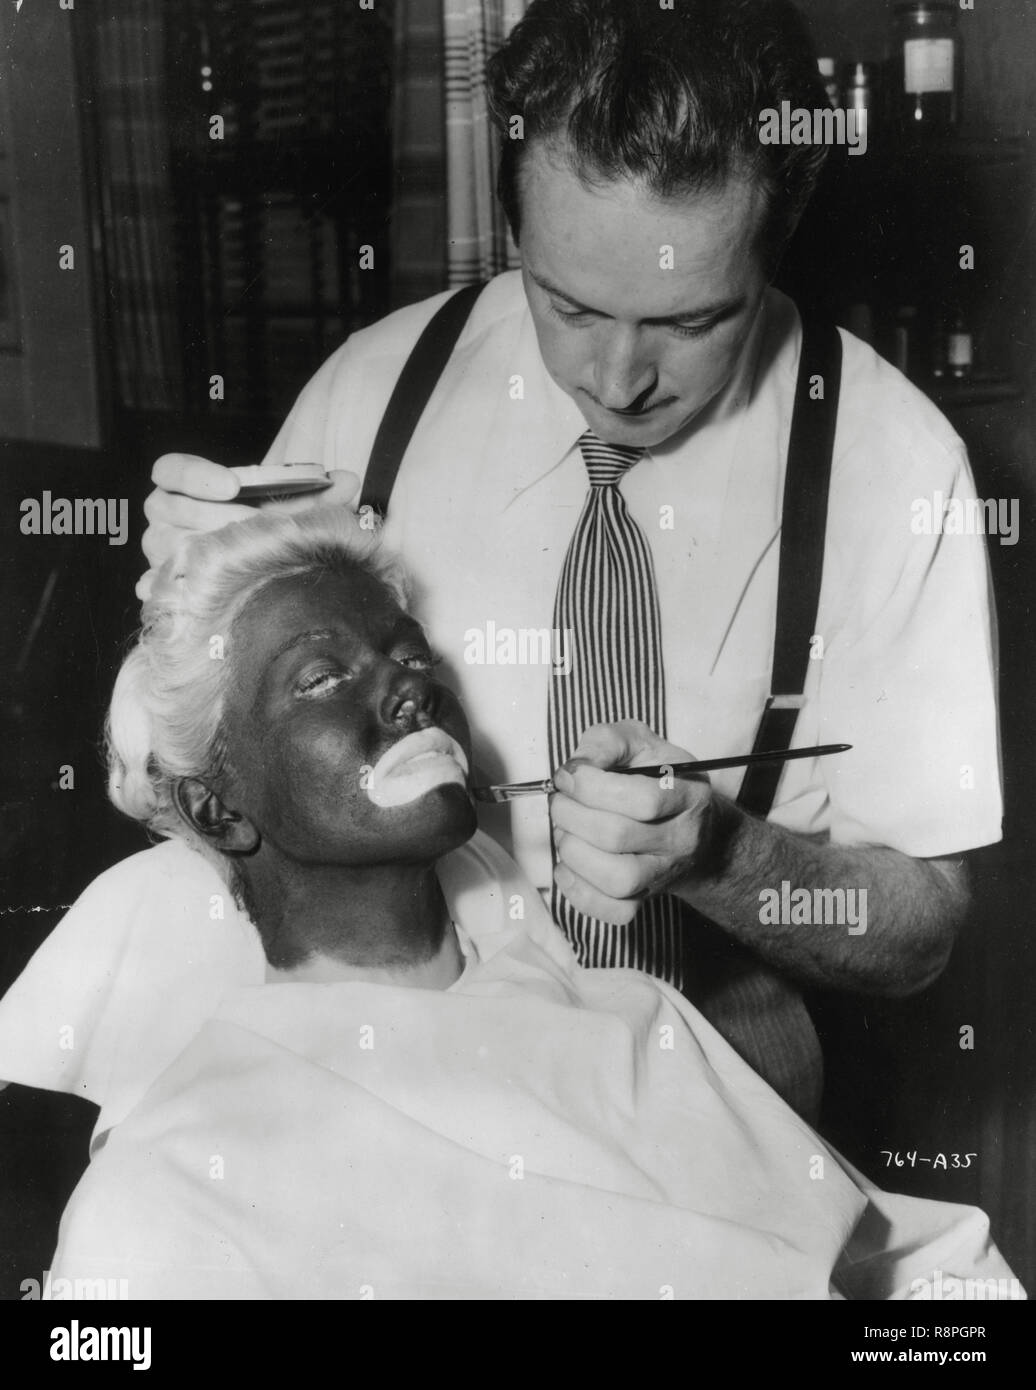 Doris Day, during a makeup session, applying black-face minstrel makeup for the film, 'I'll See You in My Dreams' (1951) Warner Bros.  File Reference # 33635 655THA Stock Photo